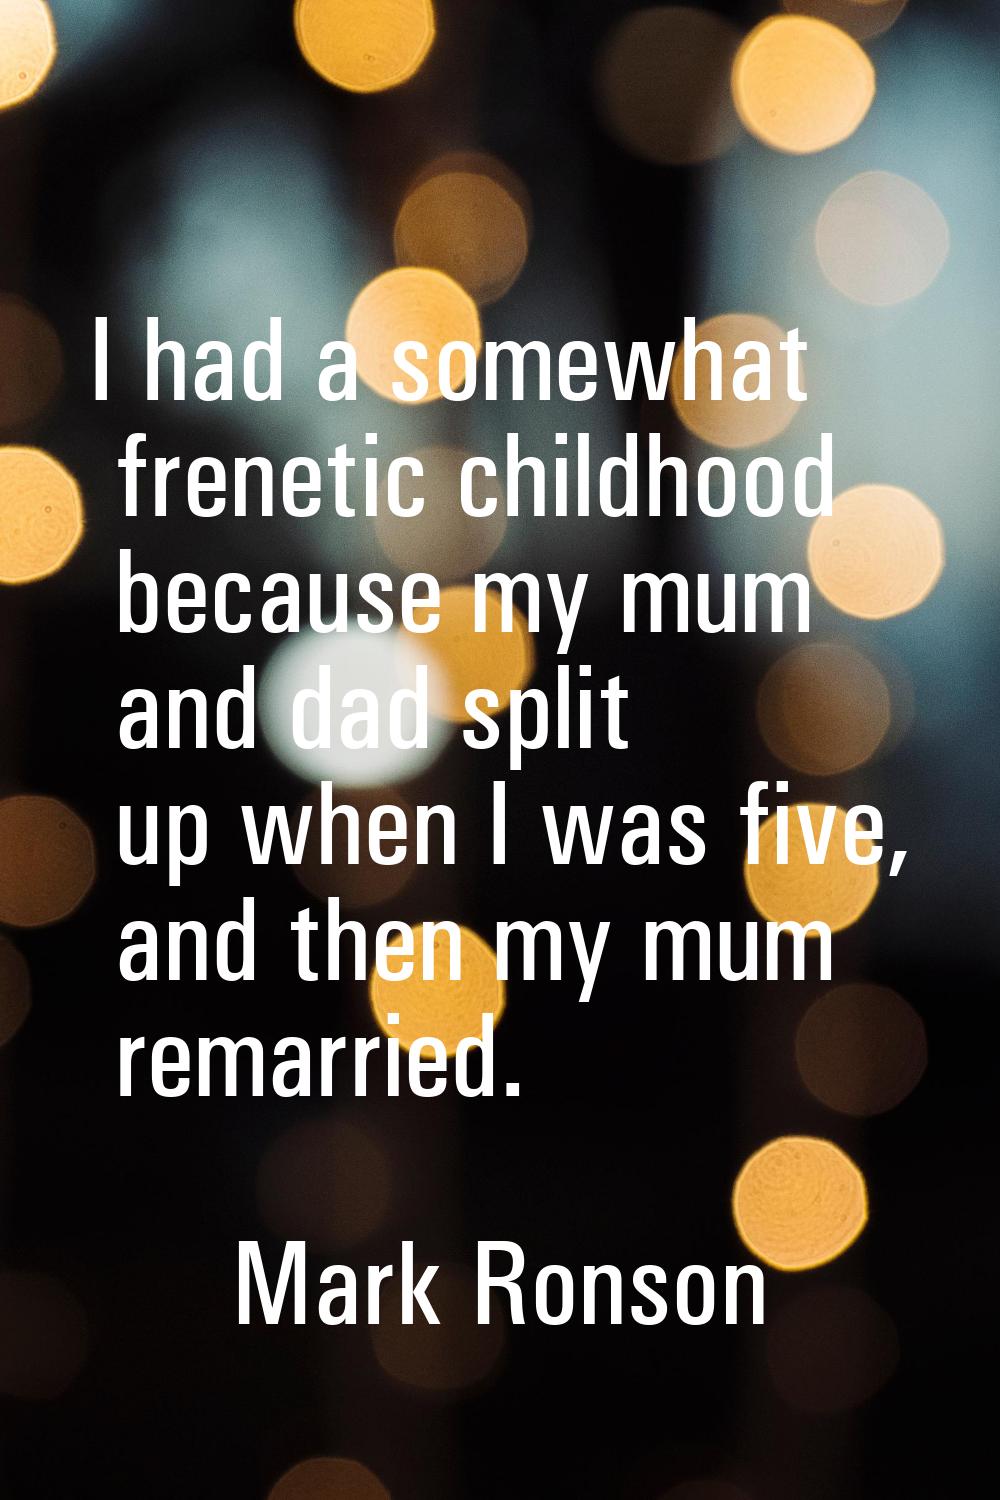 I had a somewhat frenetic childhood because my mum and dad split up when I was five, and then my mu